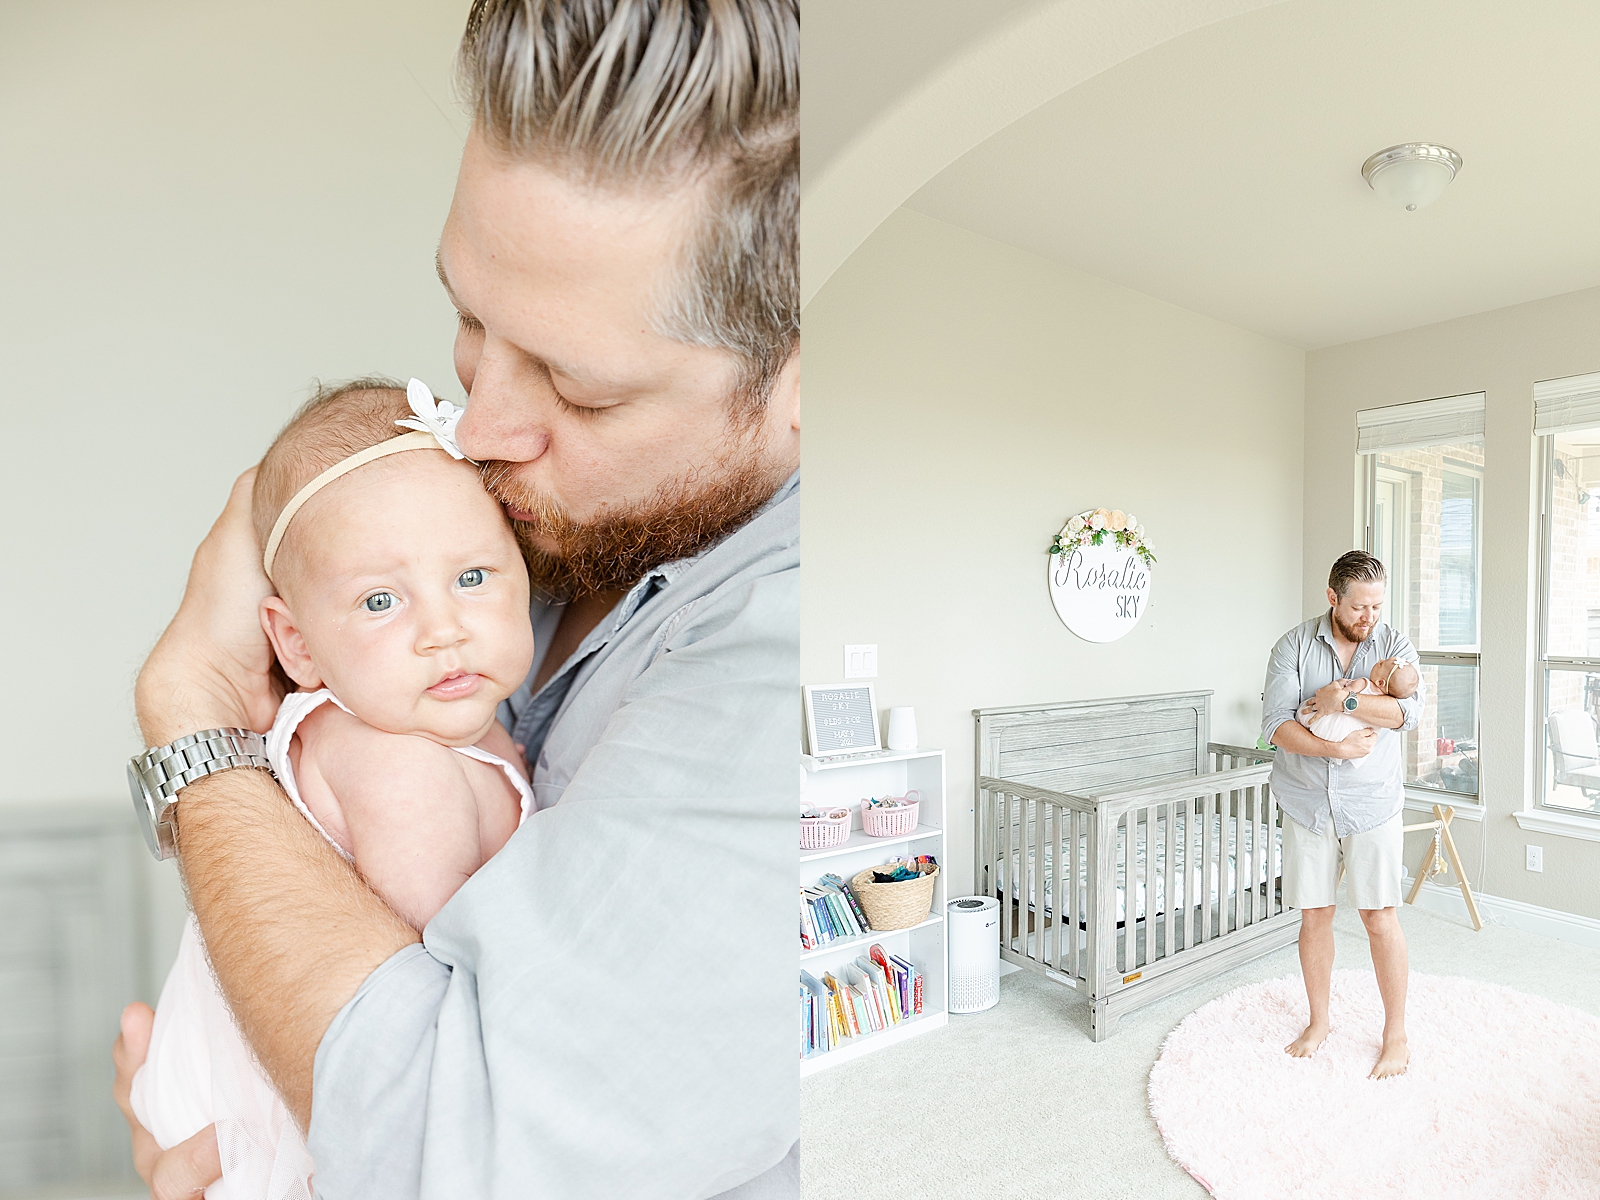 lifestyle newborn session dad kissing baby girls temple in nursery and image of dad soothing and holding baby girl in nursery from far away